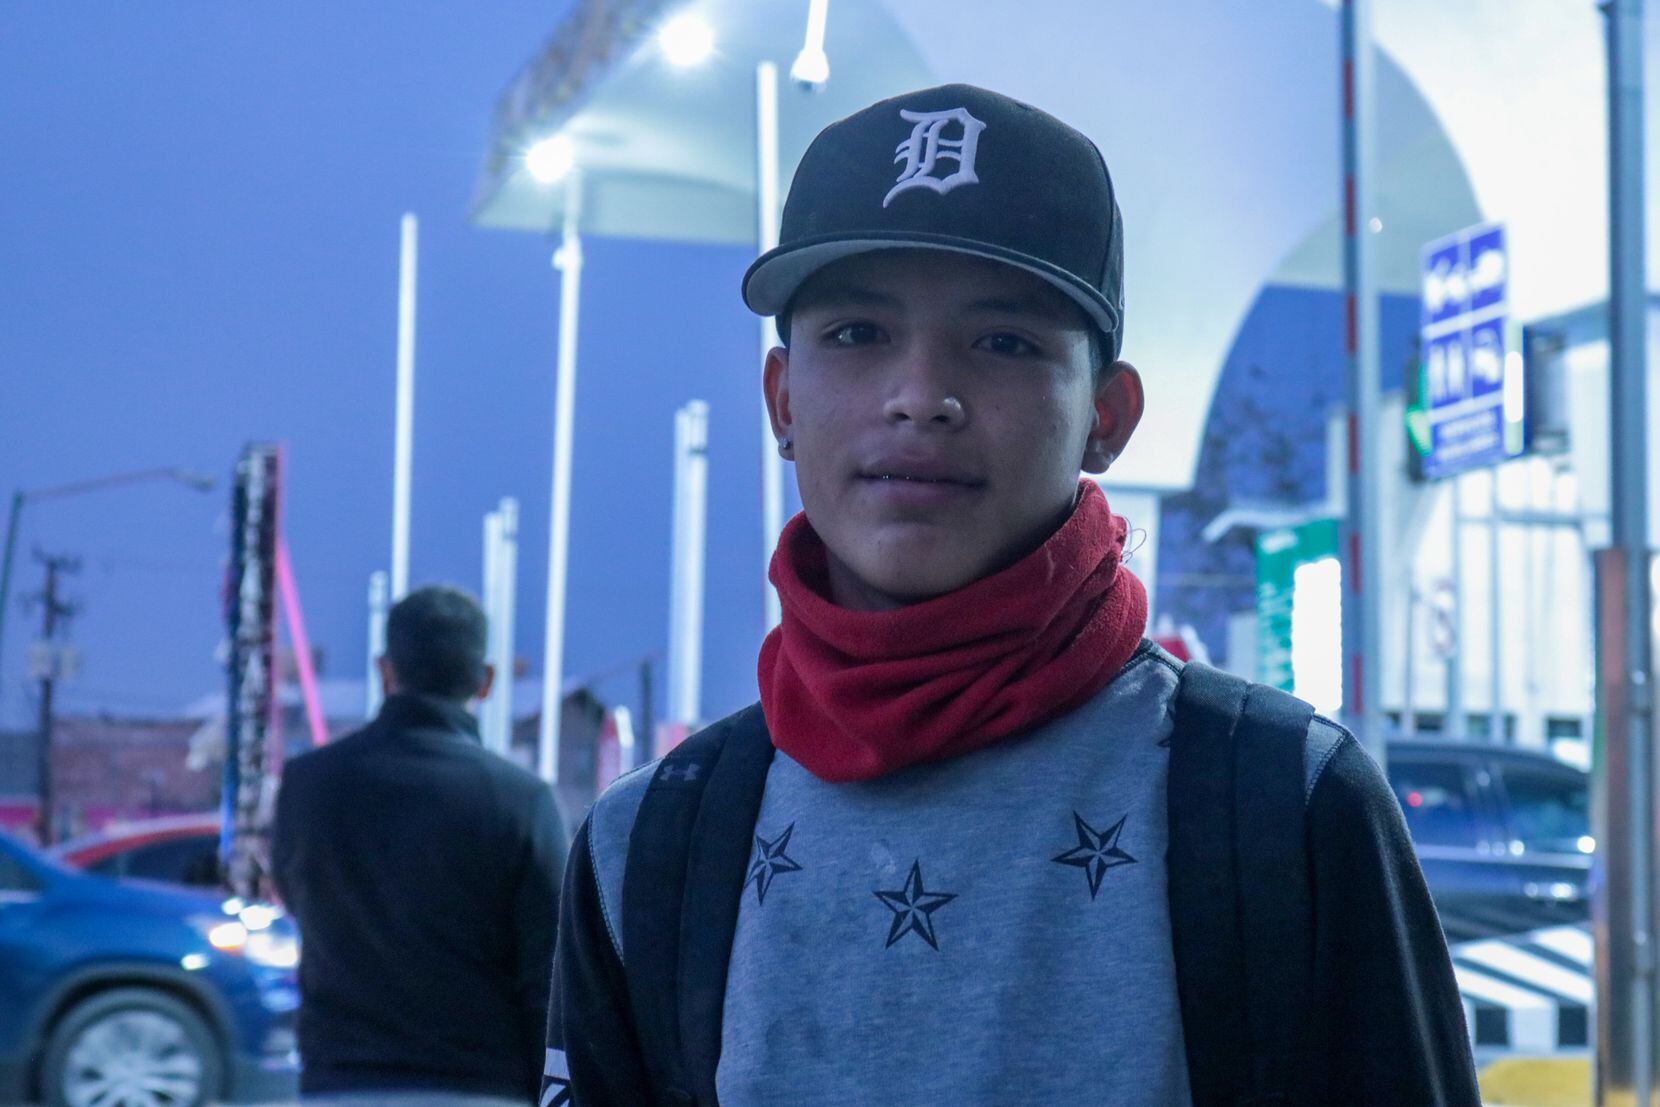 Juan Manuel Herrera, 15, feared that long lines would delay him in getting to work in El Paso, Texas at 8 a.m. Arriving at 5:30 a.m., he found less queue than he expected.